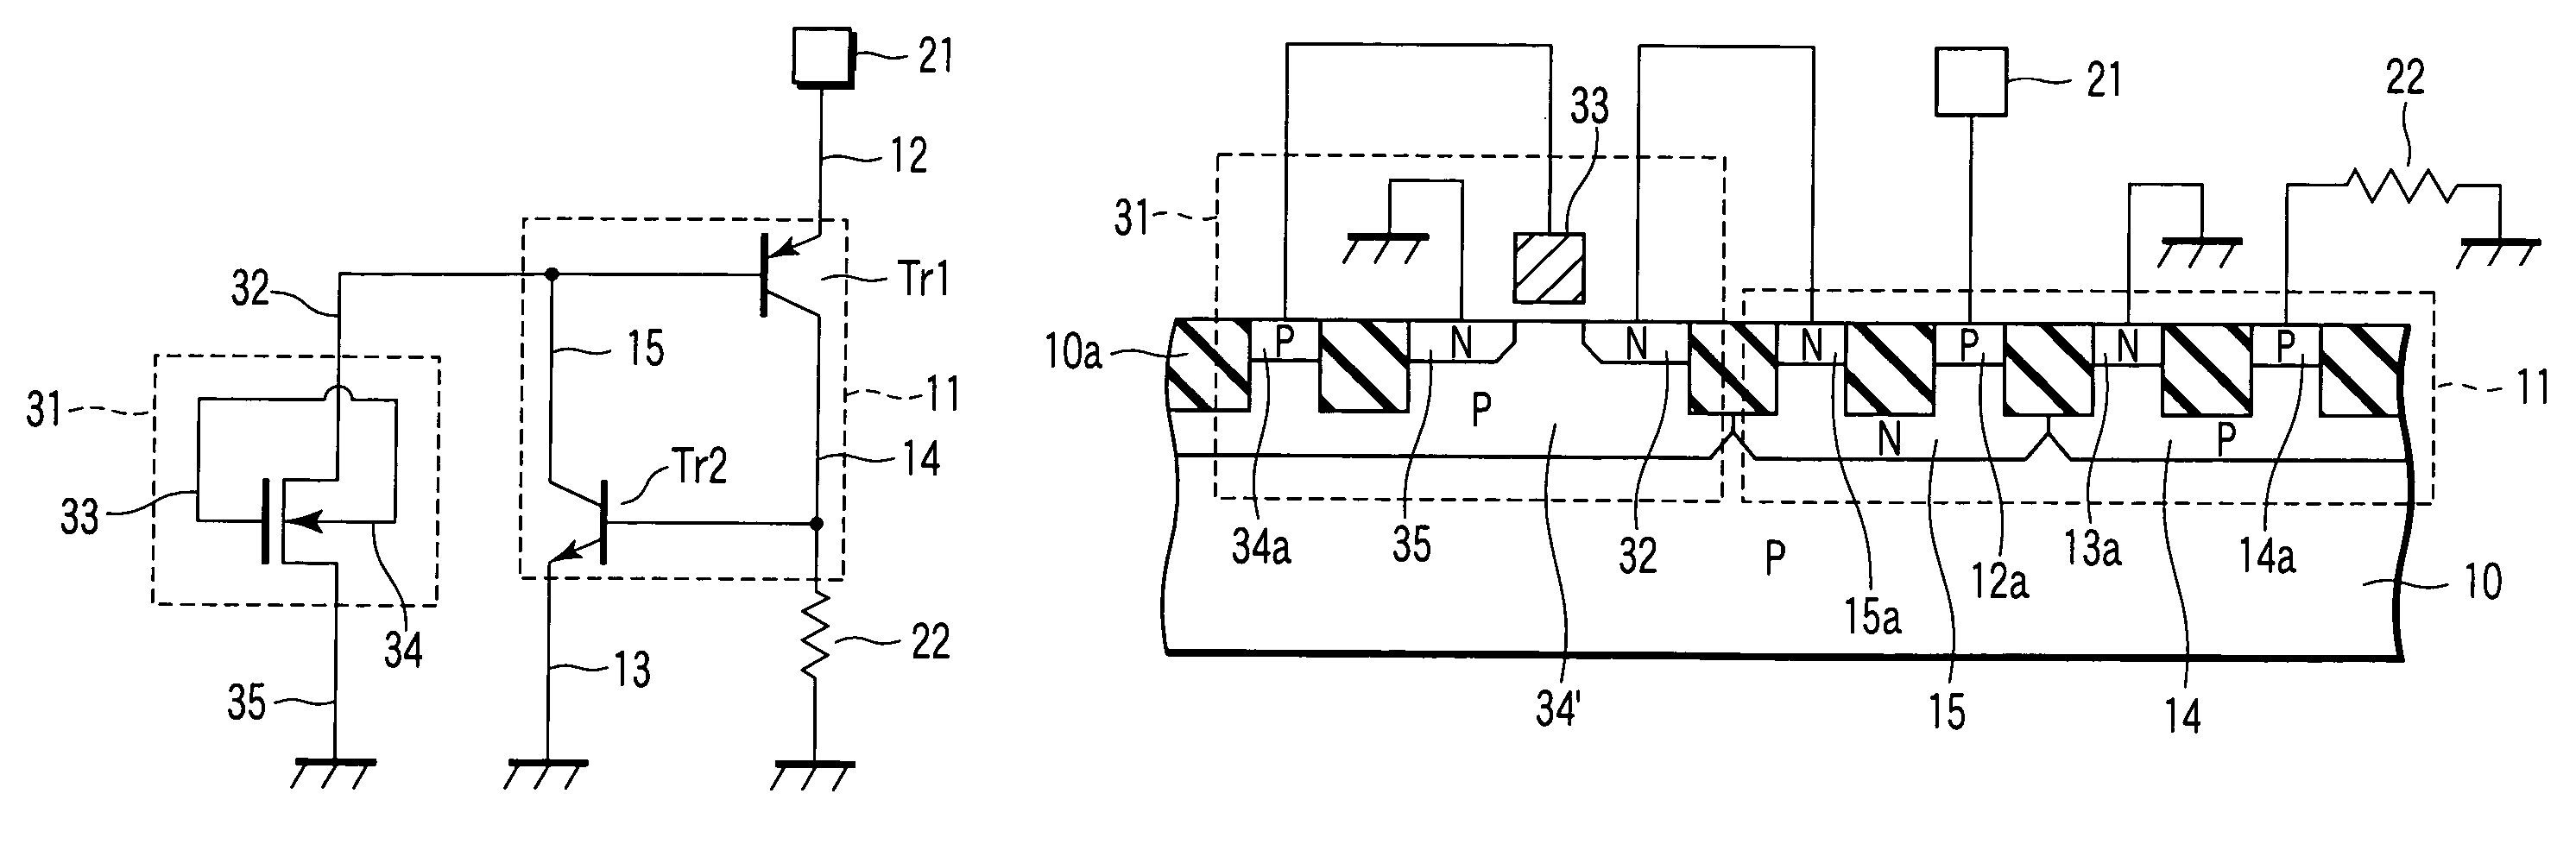 Semiconductor device including metal-oxide-silicon field-effect transistor as a trigger circuit